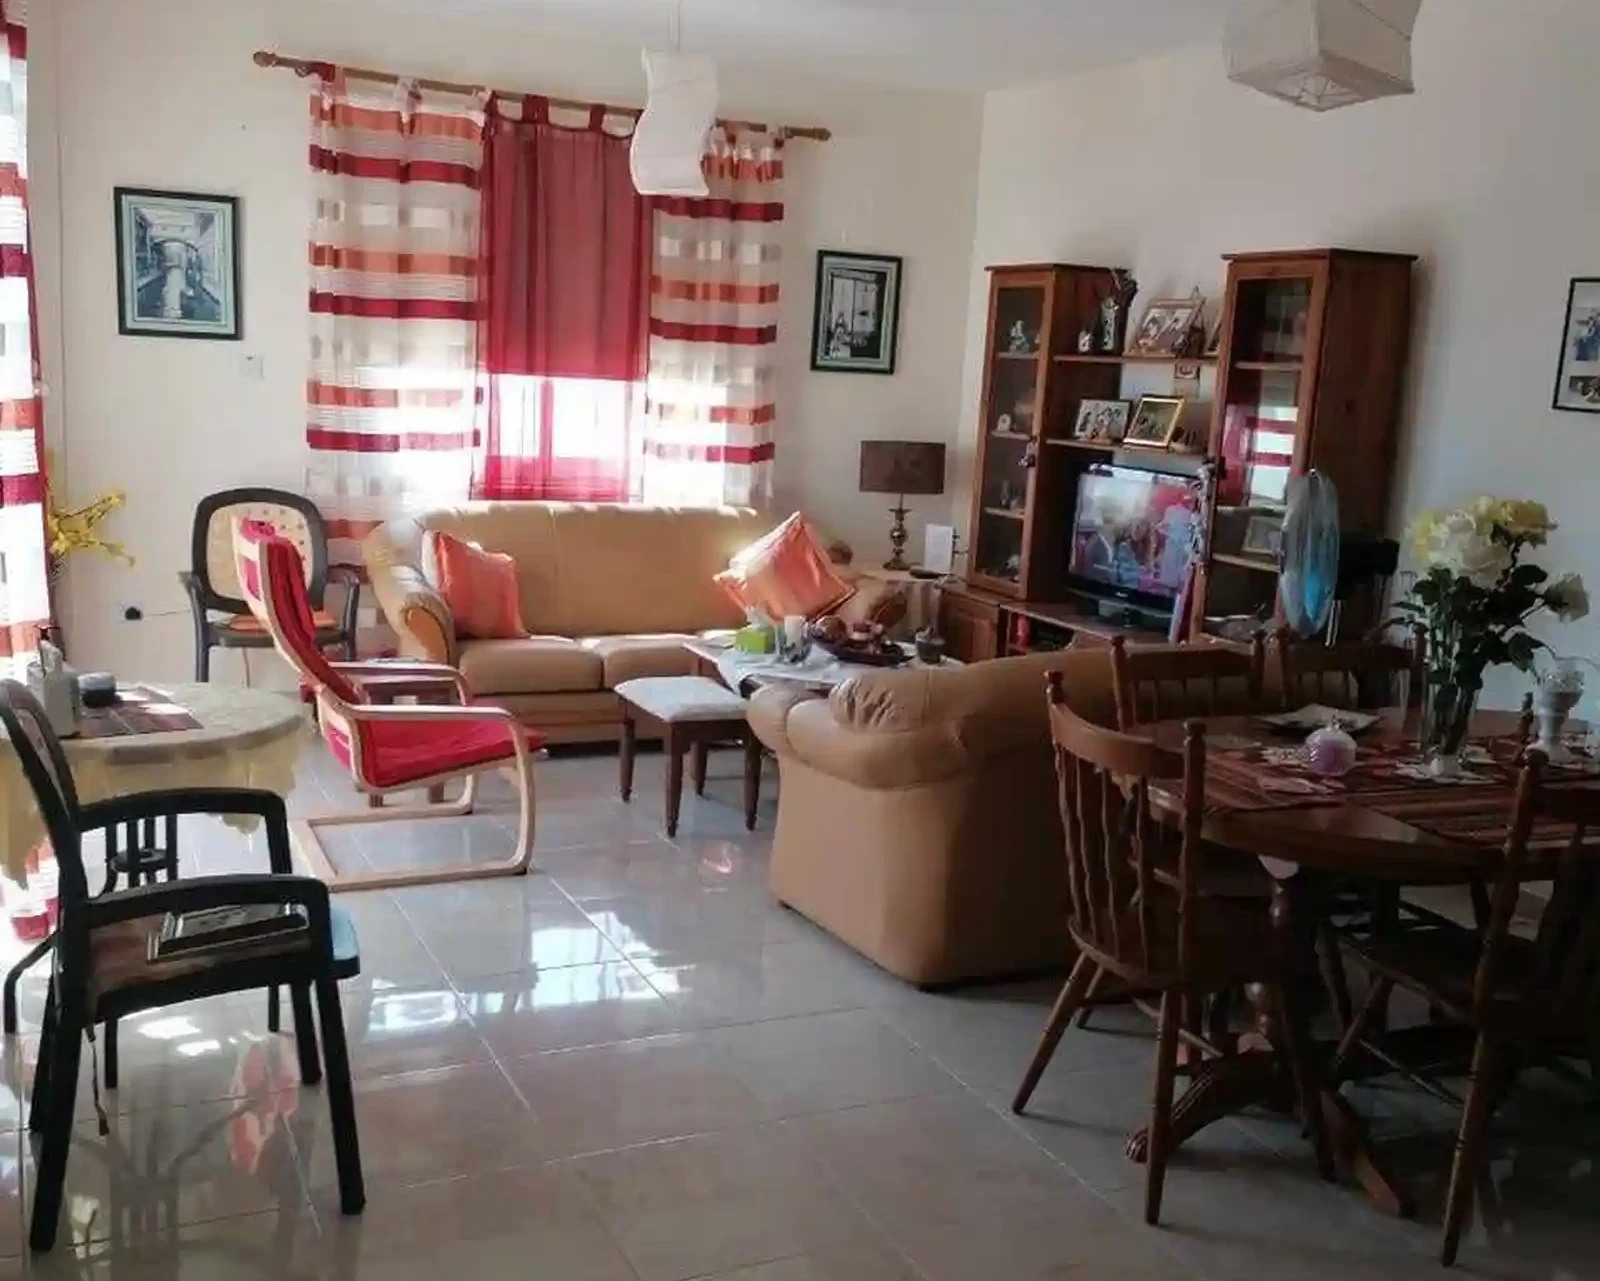 3-bedroom apartment fоr sаle €149.000, image 1